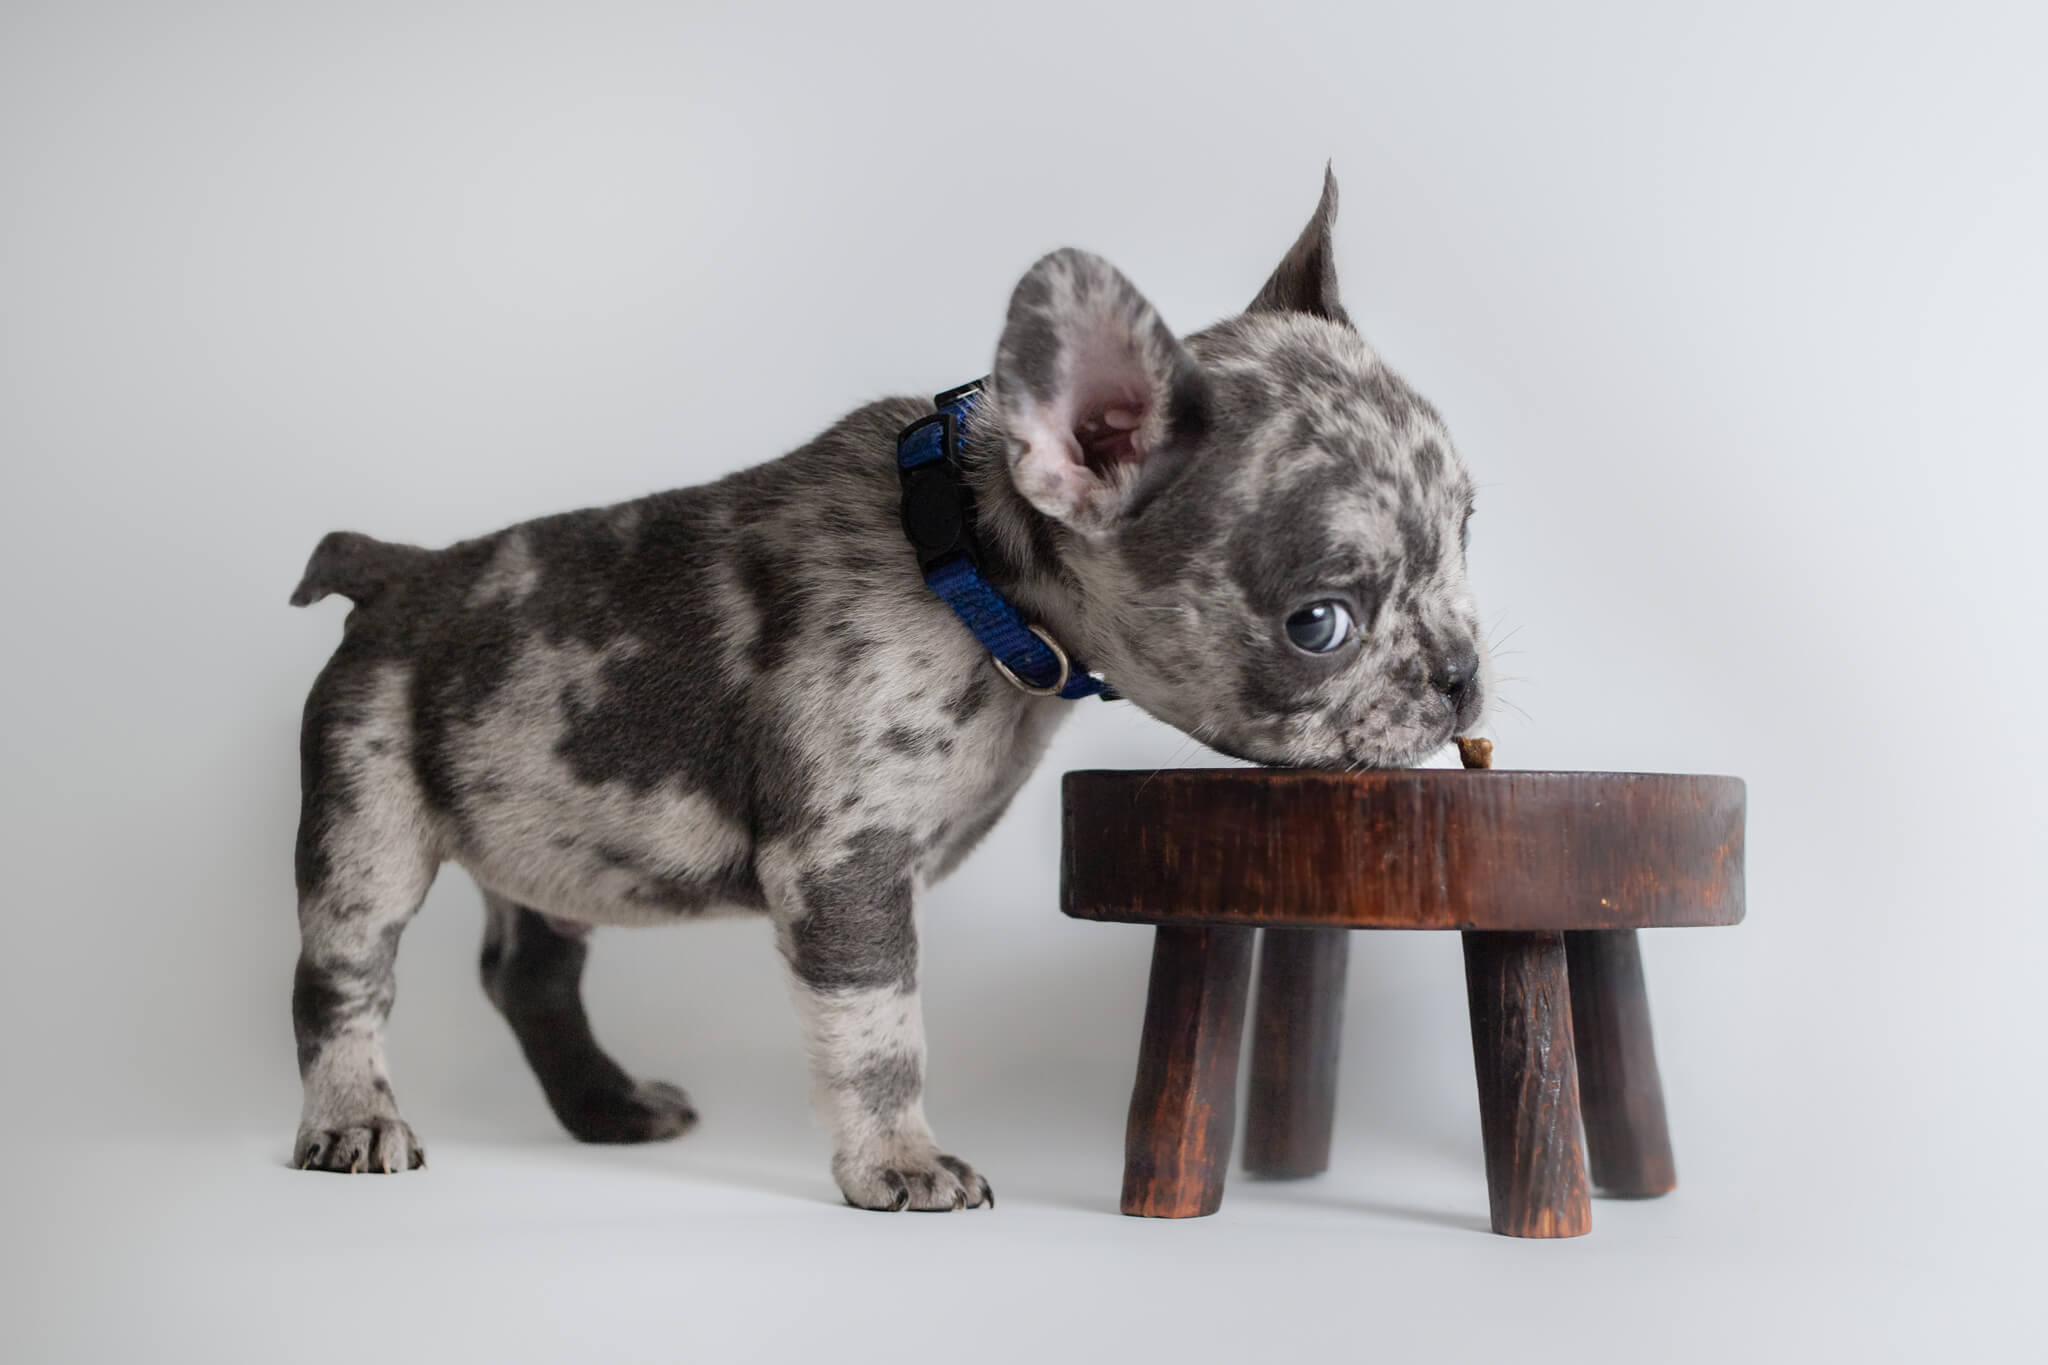 Spotted French bulldog puppy sniffs a treat on a wooden stool